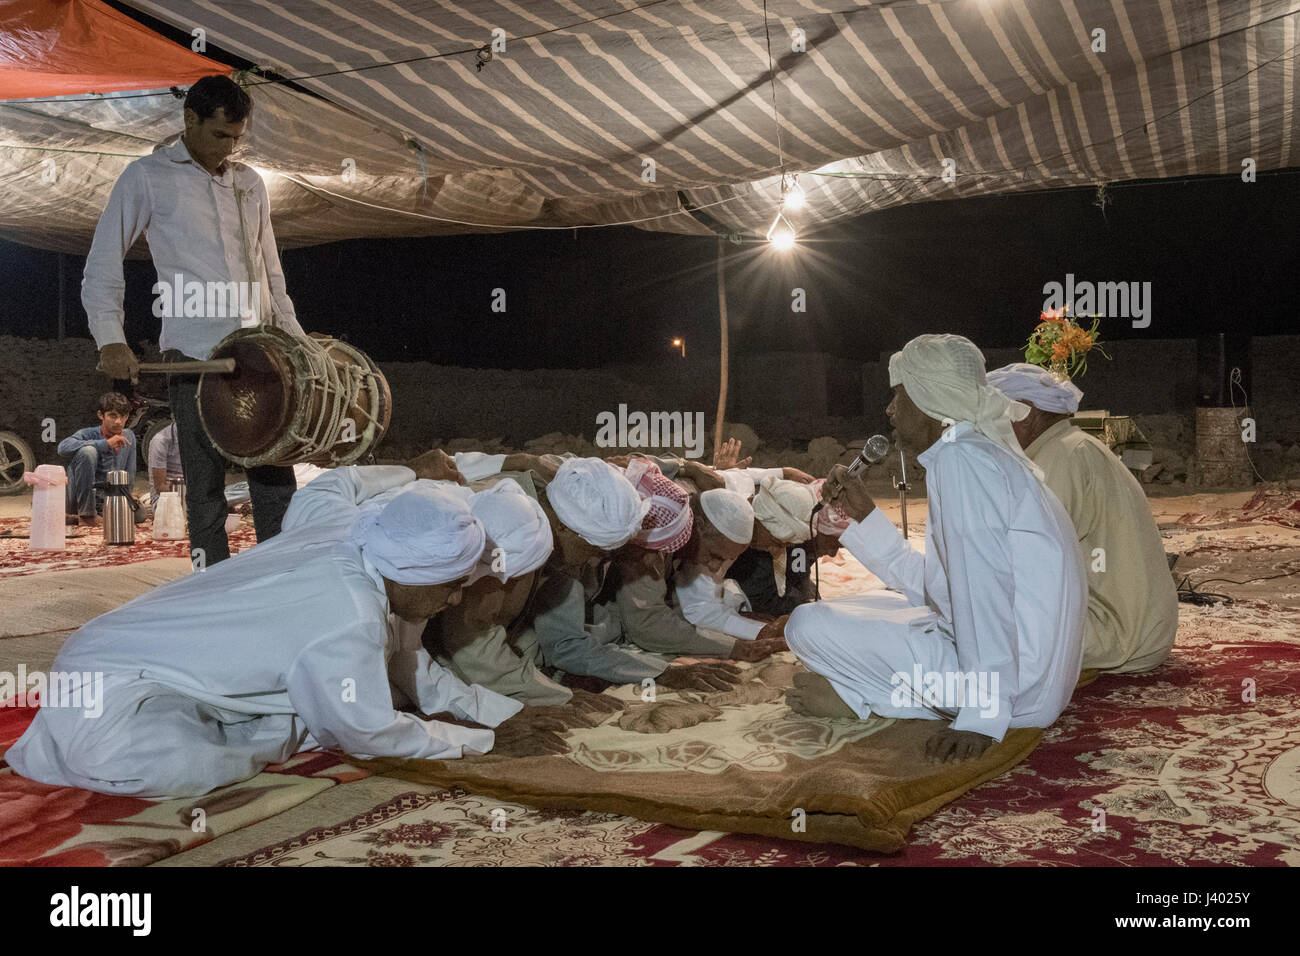 Older Men Dancing At The Sound Of A Religious Singer And A Drum Player Under A Tent On Monday Evening, The First Night Of A Traditional Wedding, Tabl, Stock Photo